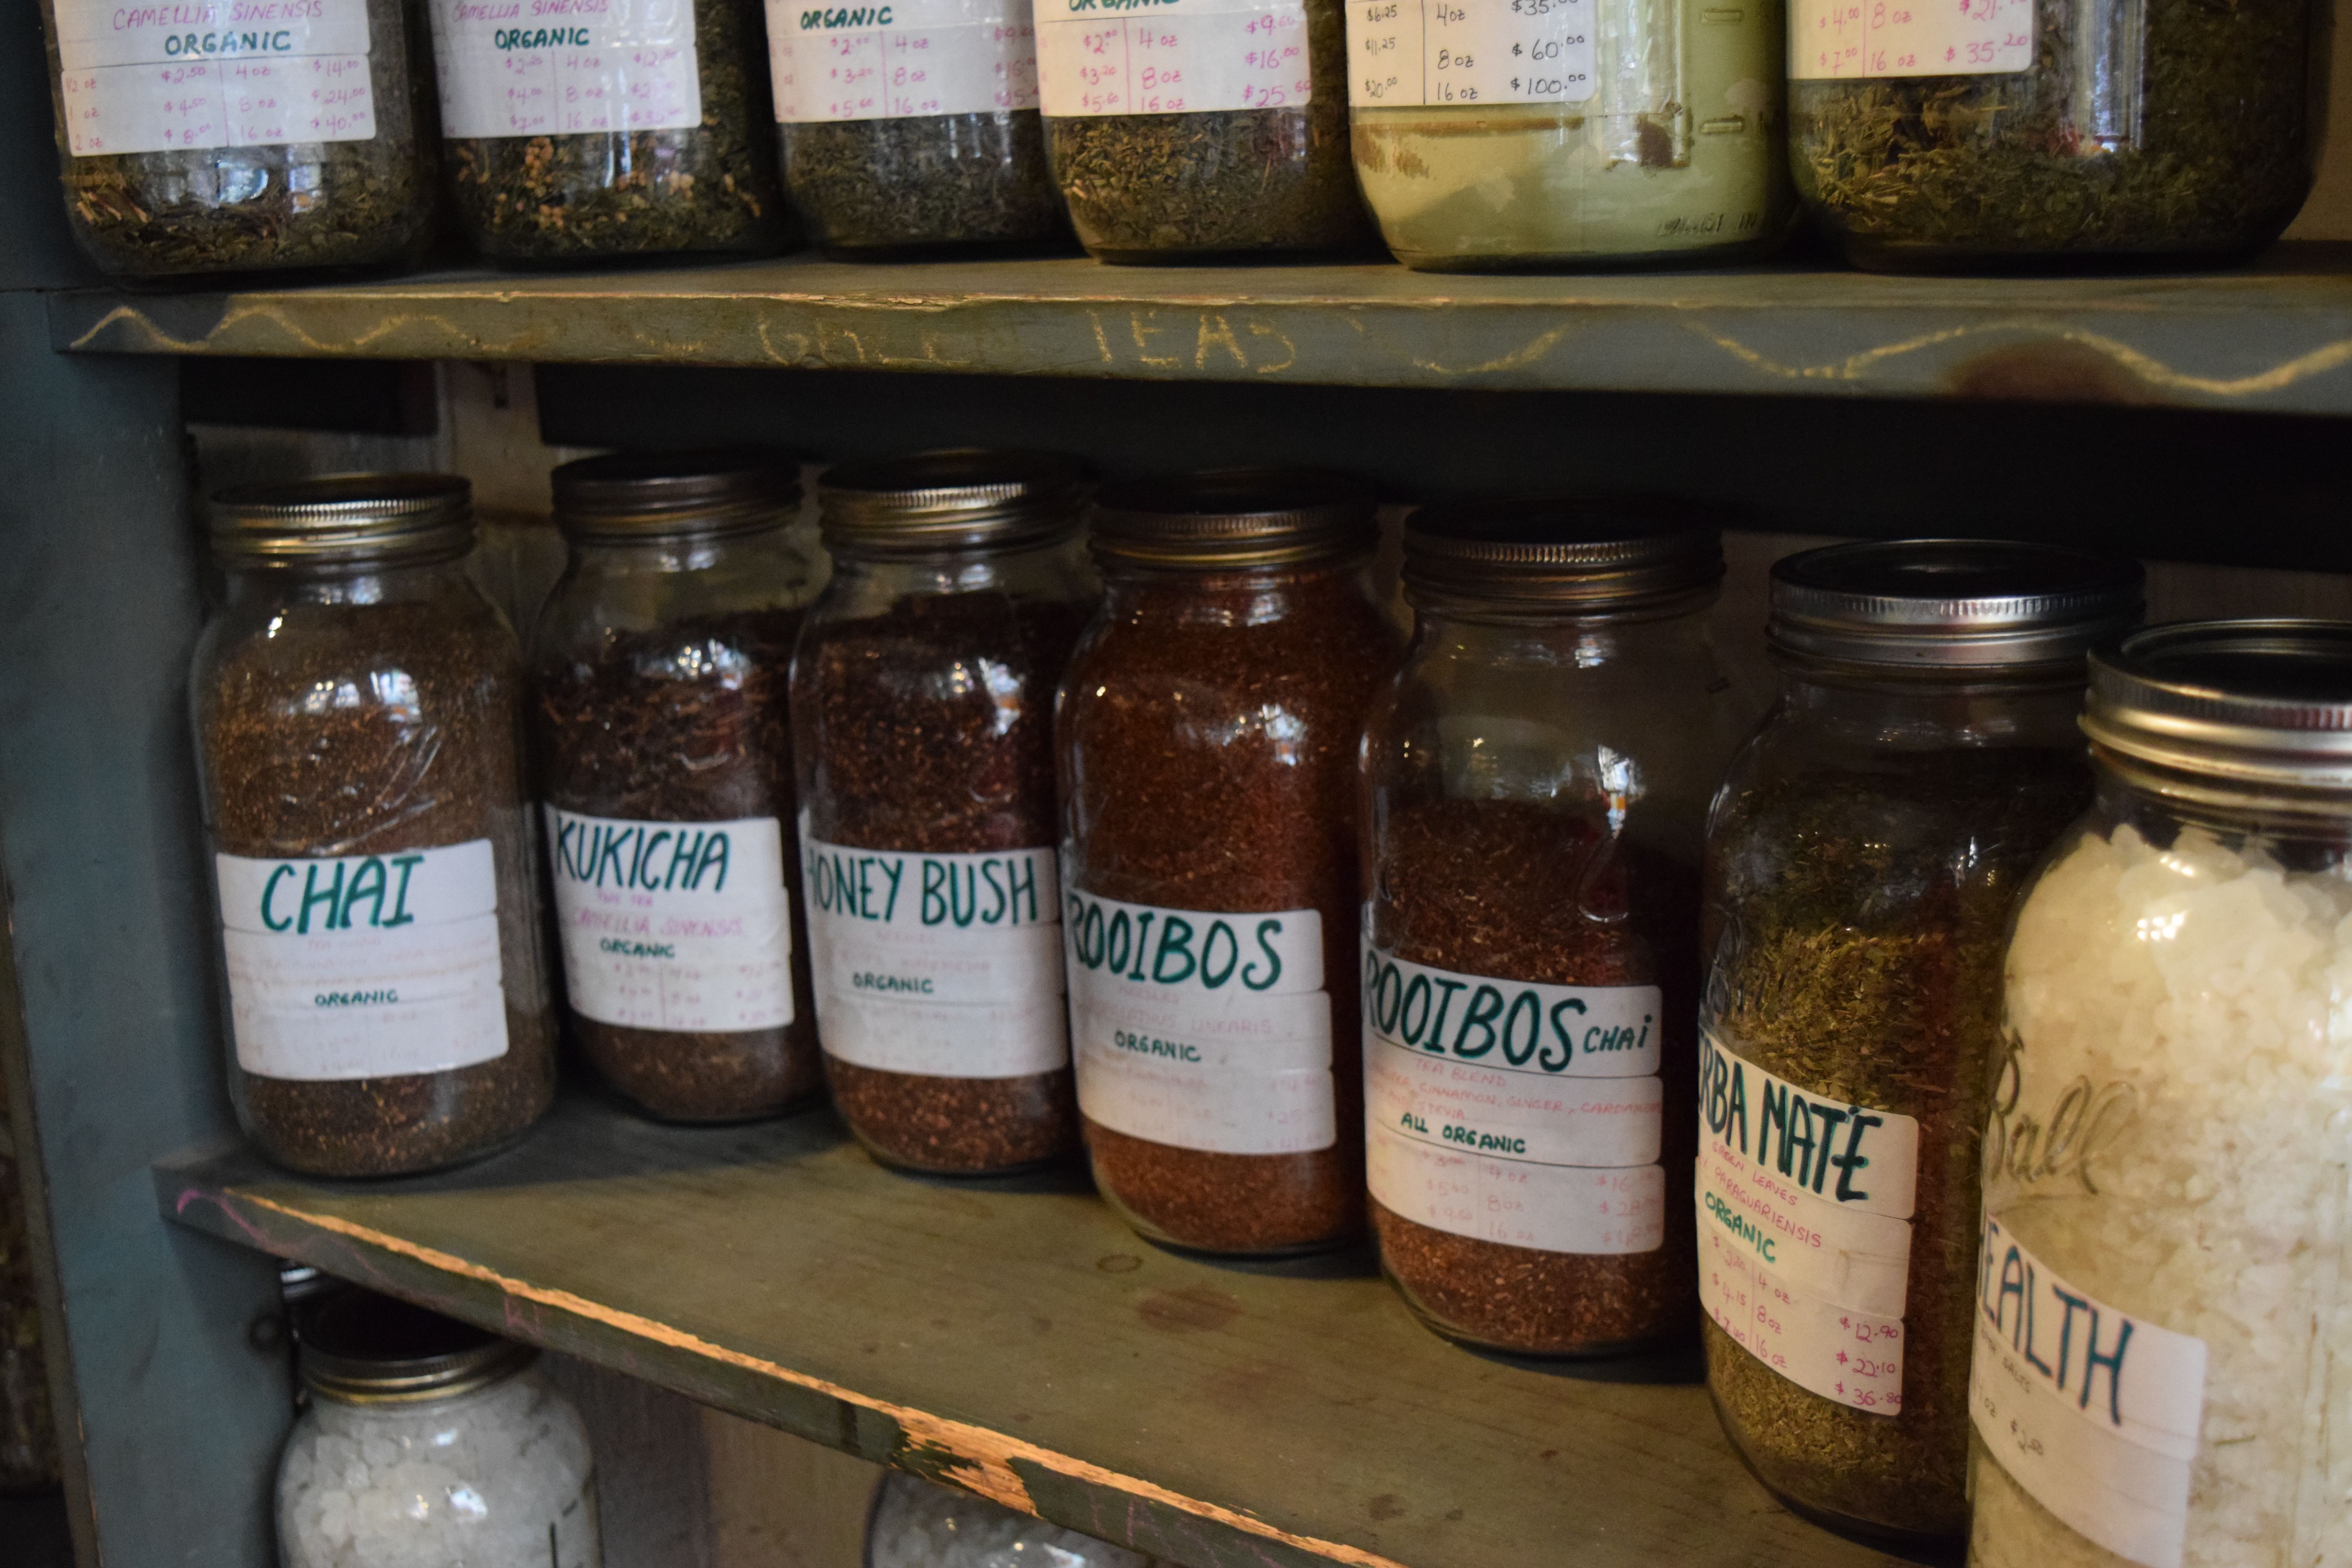 Herbs in jars at Flower Power Herbs. Image by Claire Hogan. United States, 2019